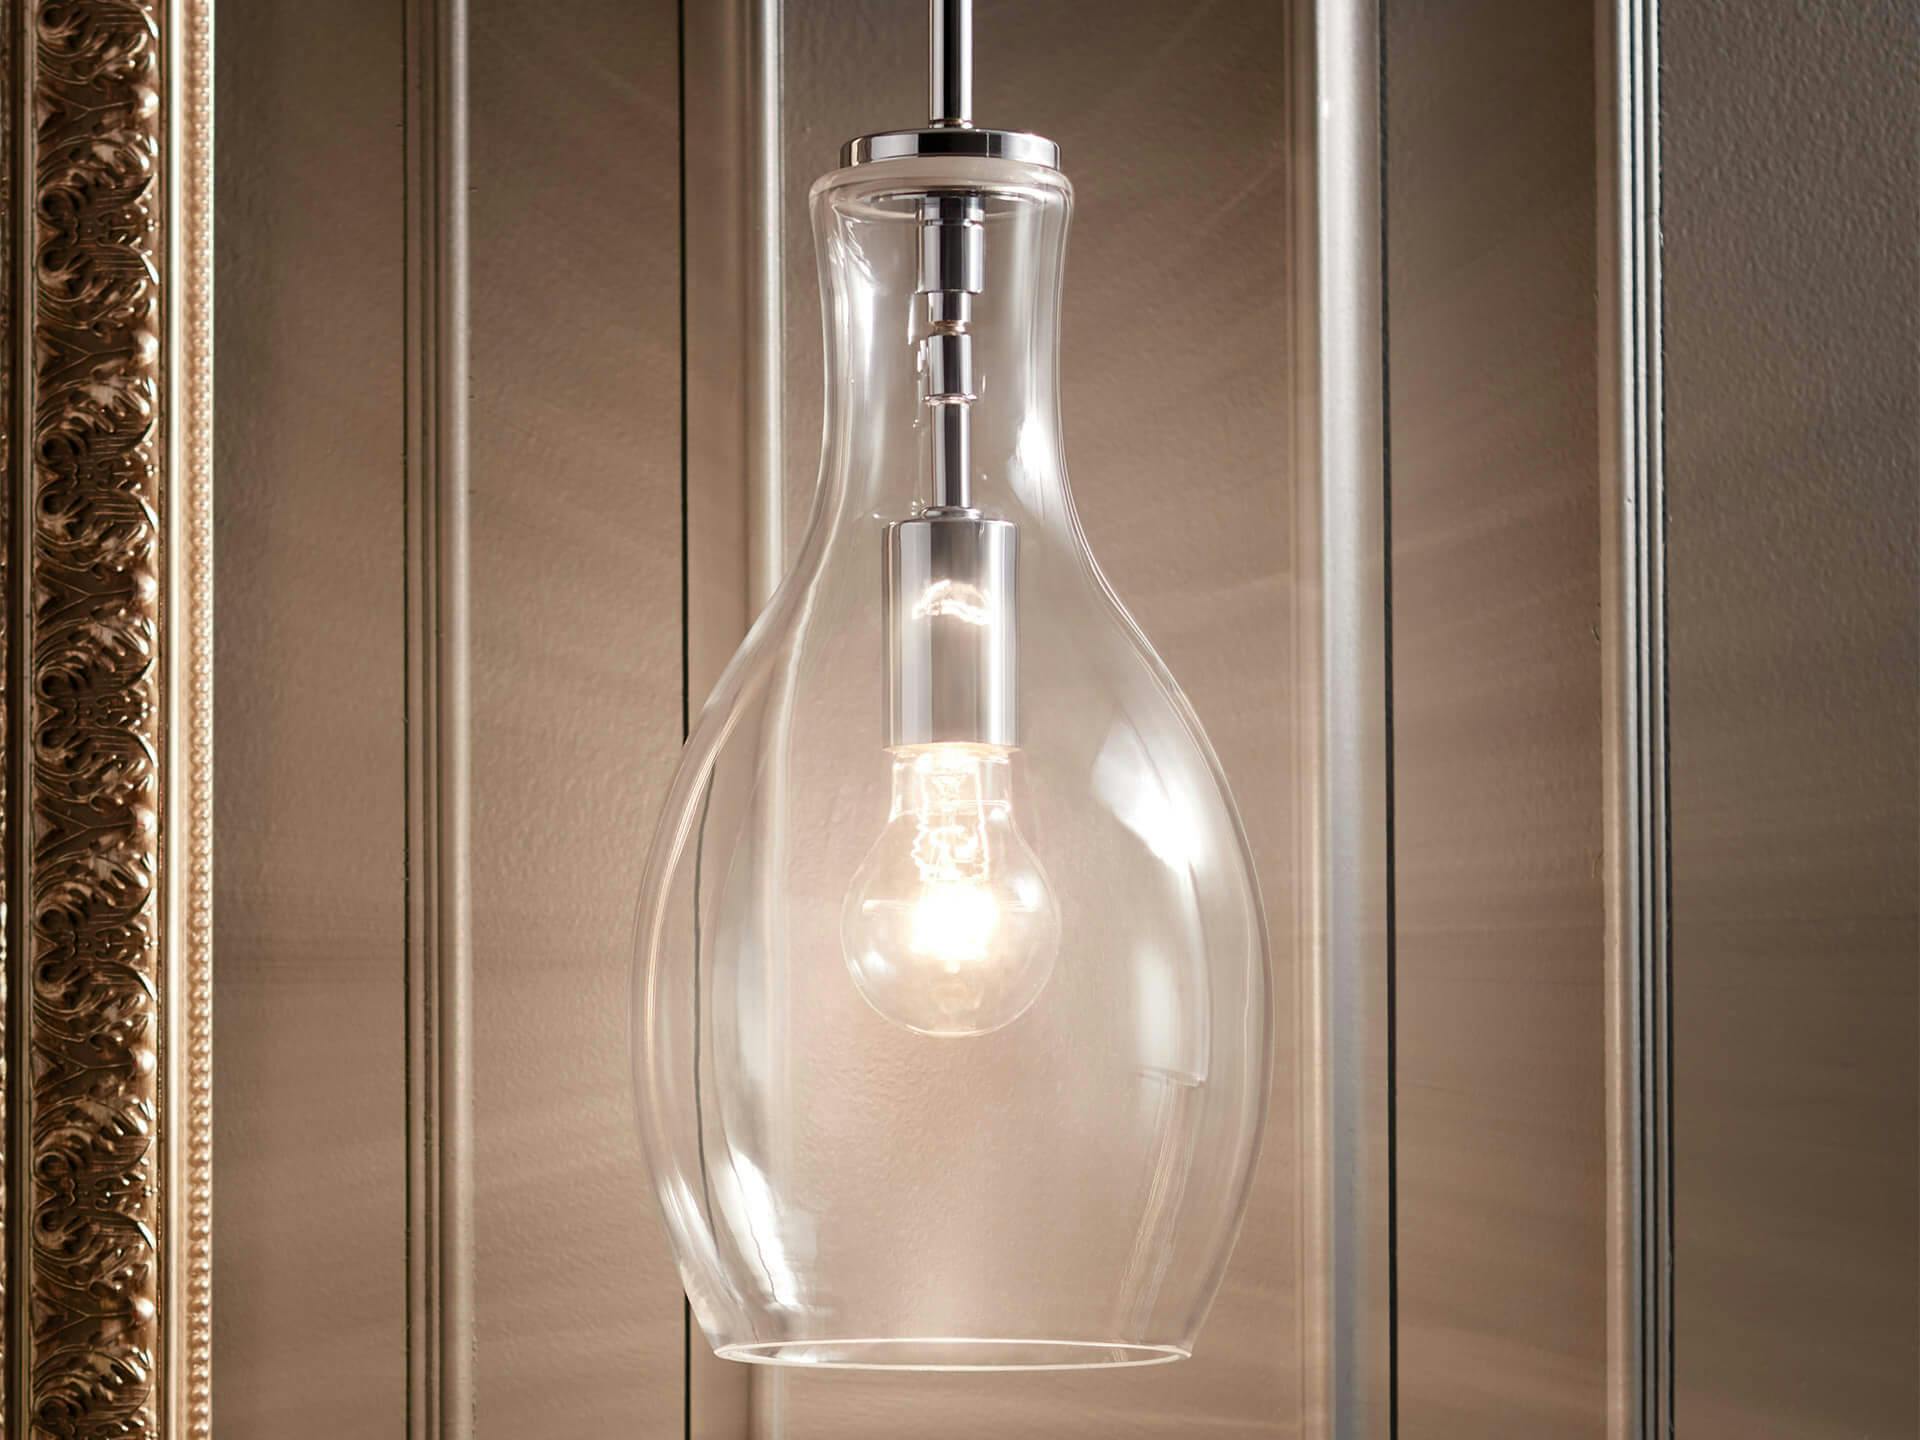 Example of a glass pendant lamp with clean glass